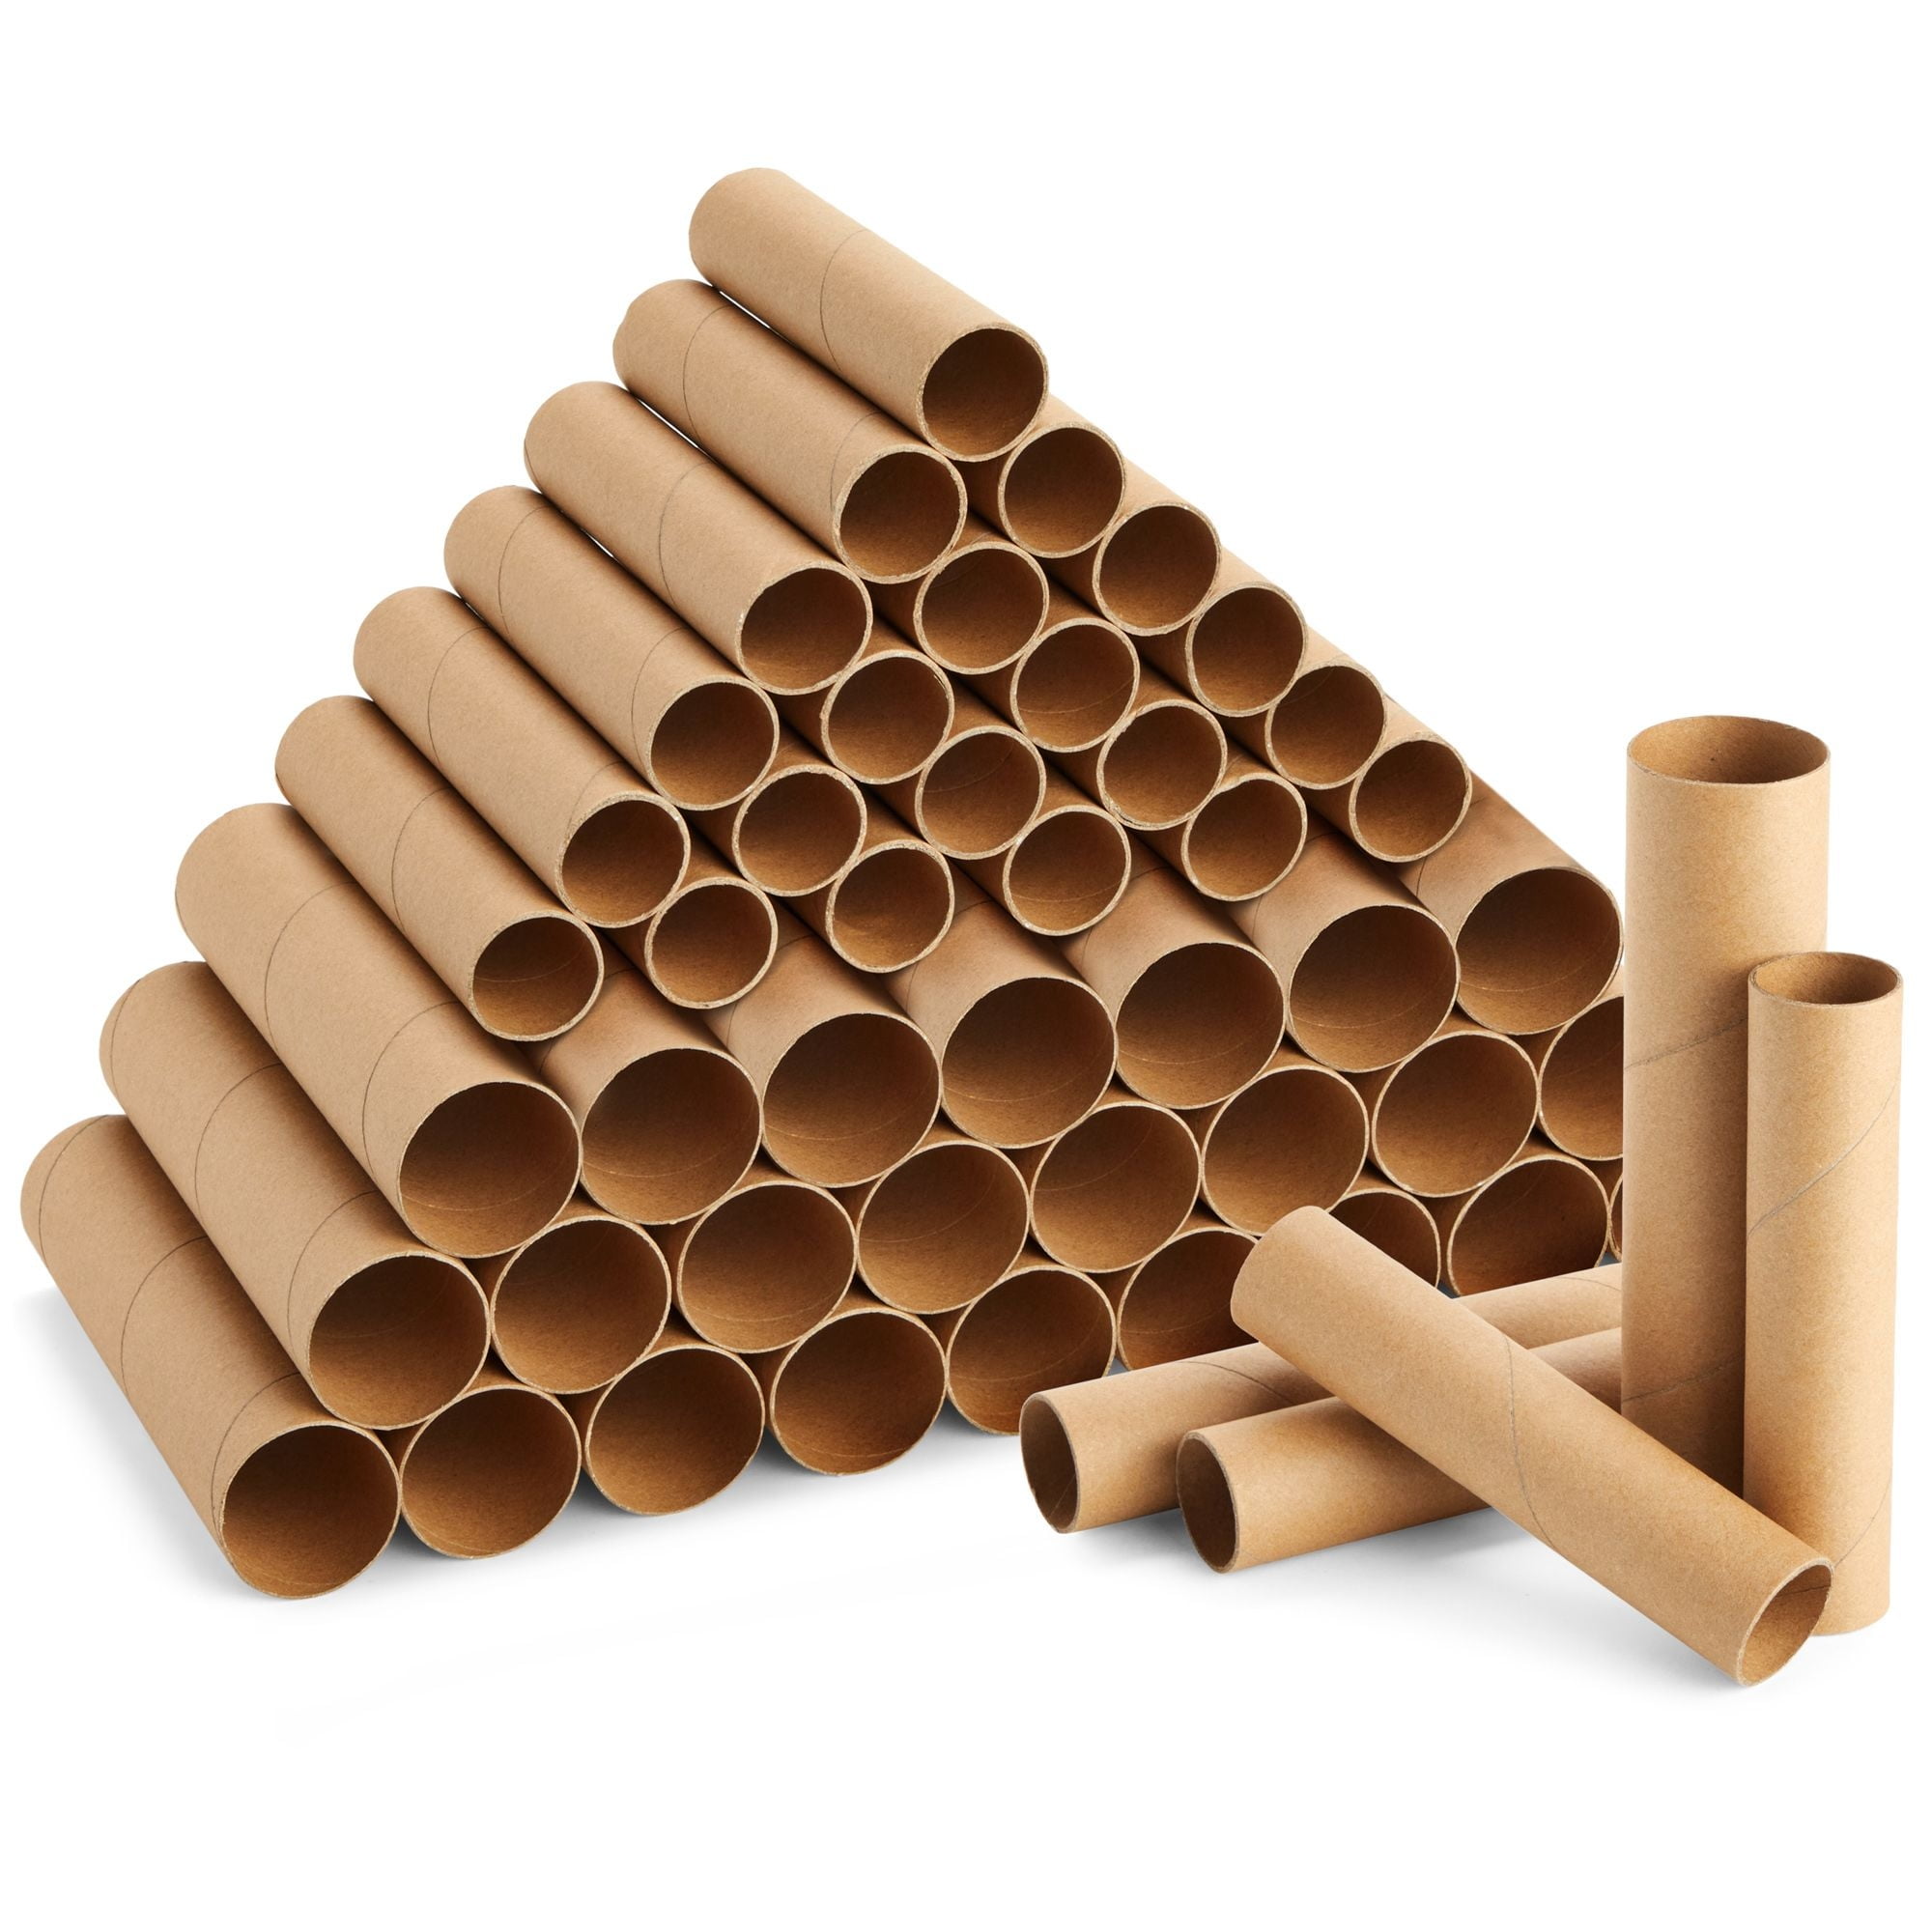 KYMY 48 Pack Brown Cardboard Tubes for Crafts, DIY Crafting Cardboard Paper  Cylinder Tubes, Thick and Premium Cardboard Craft Thick Empty Toilet Paper